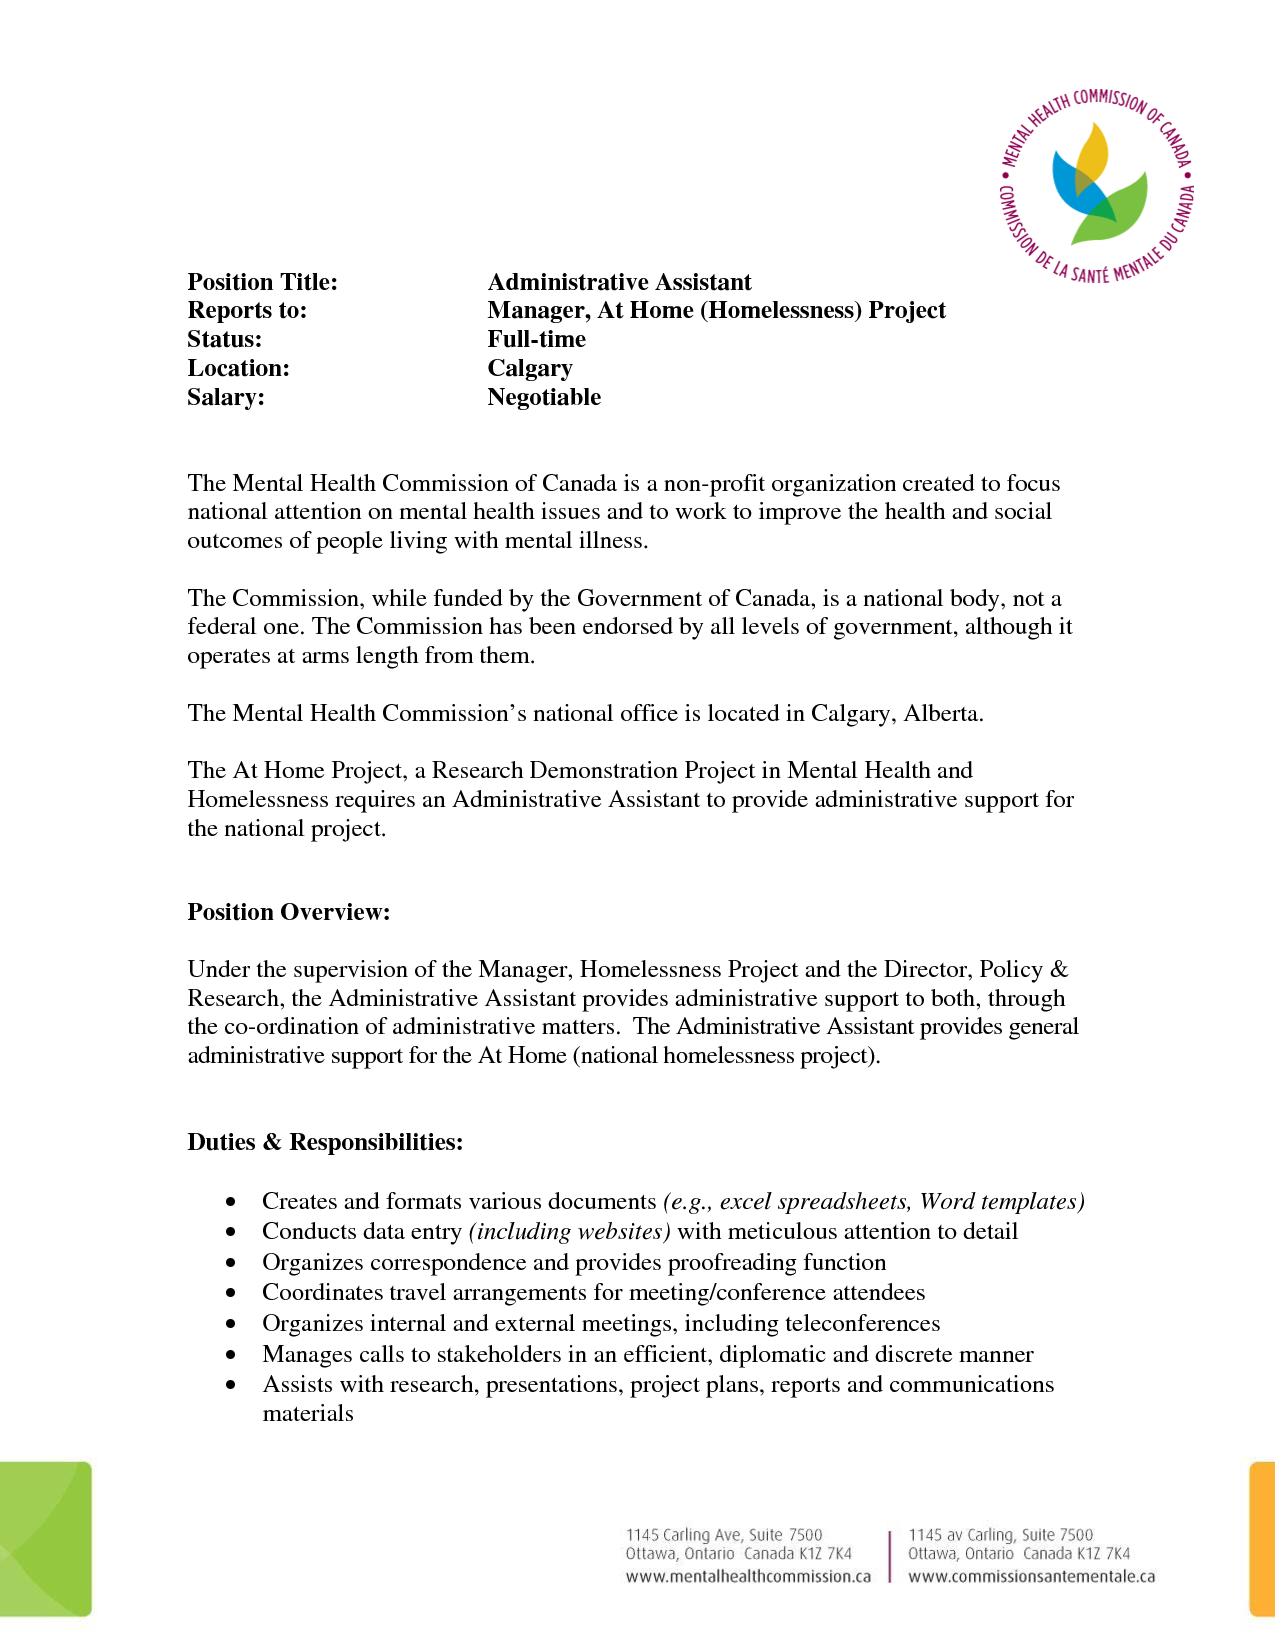 resume template administrative assistant amusing sample resume for